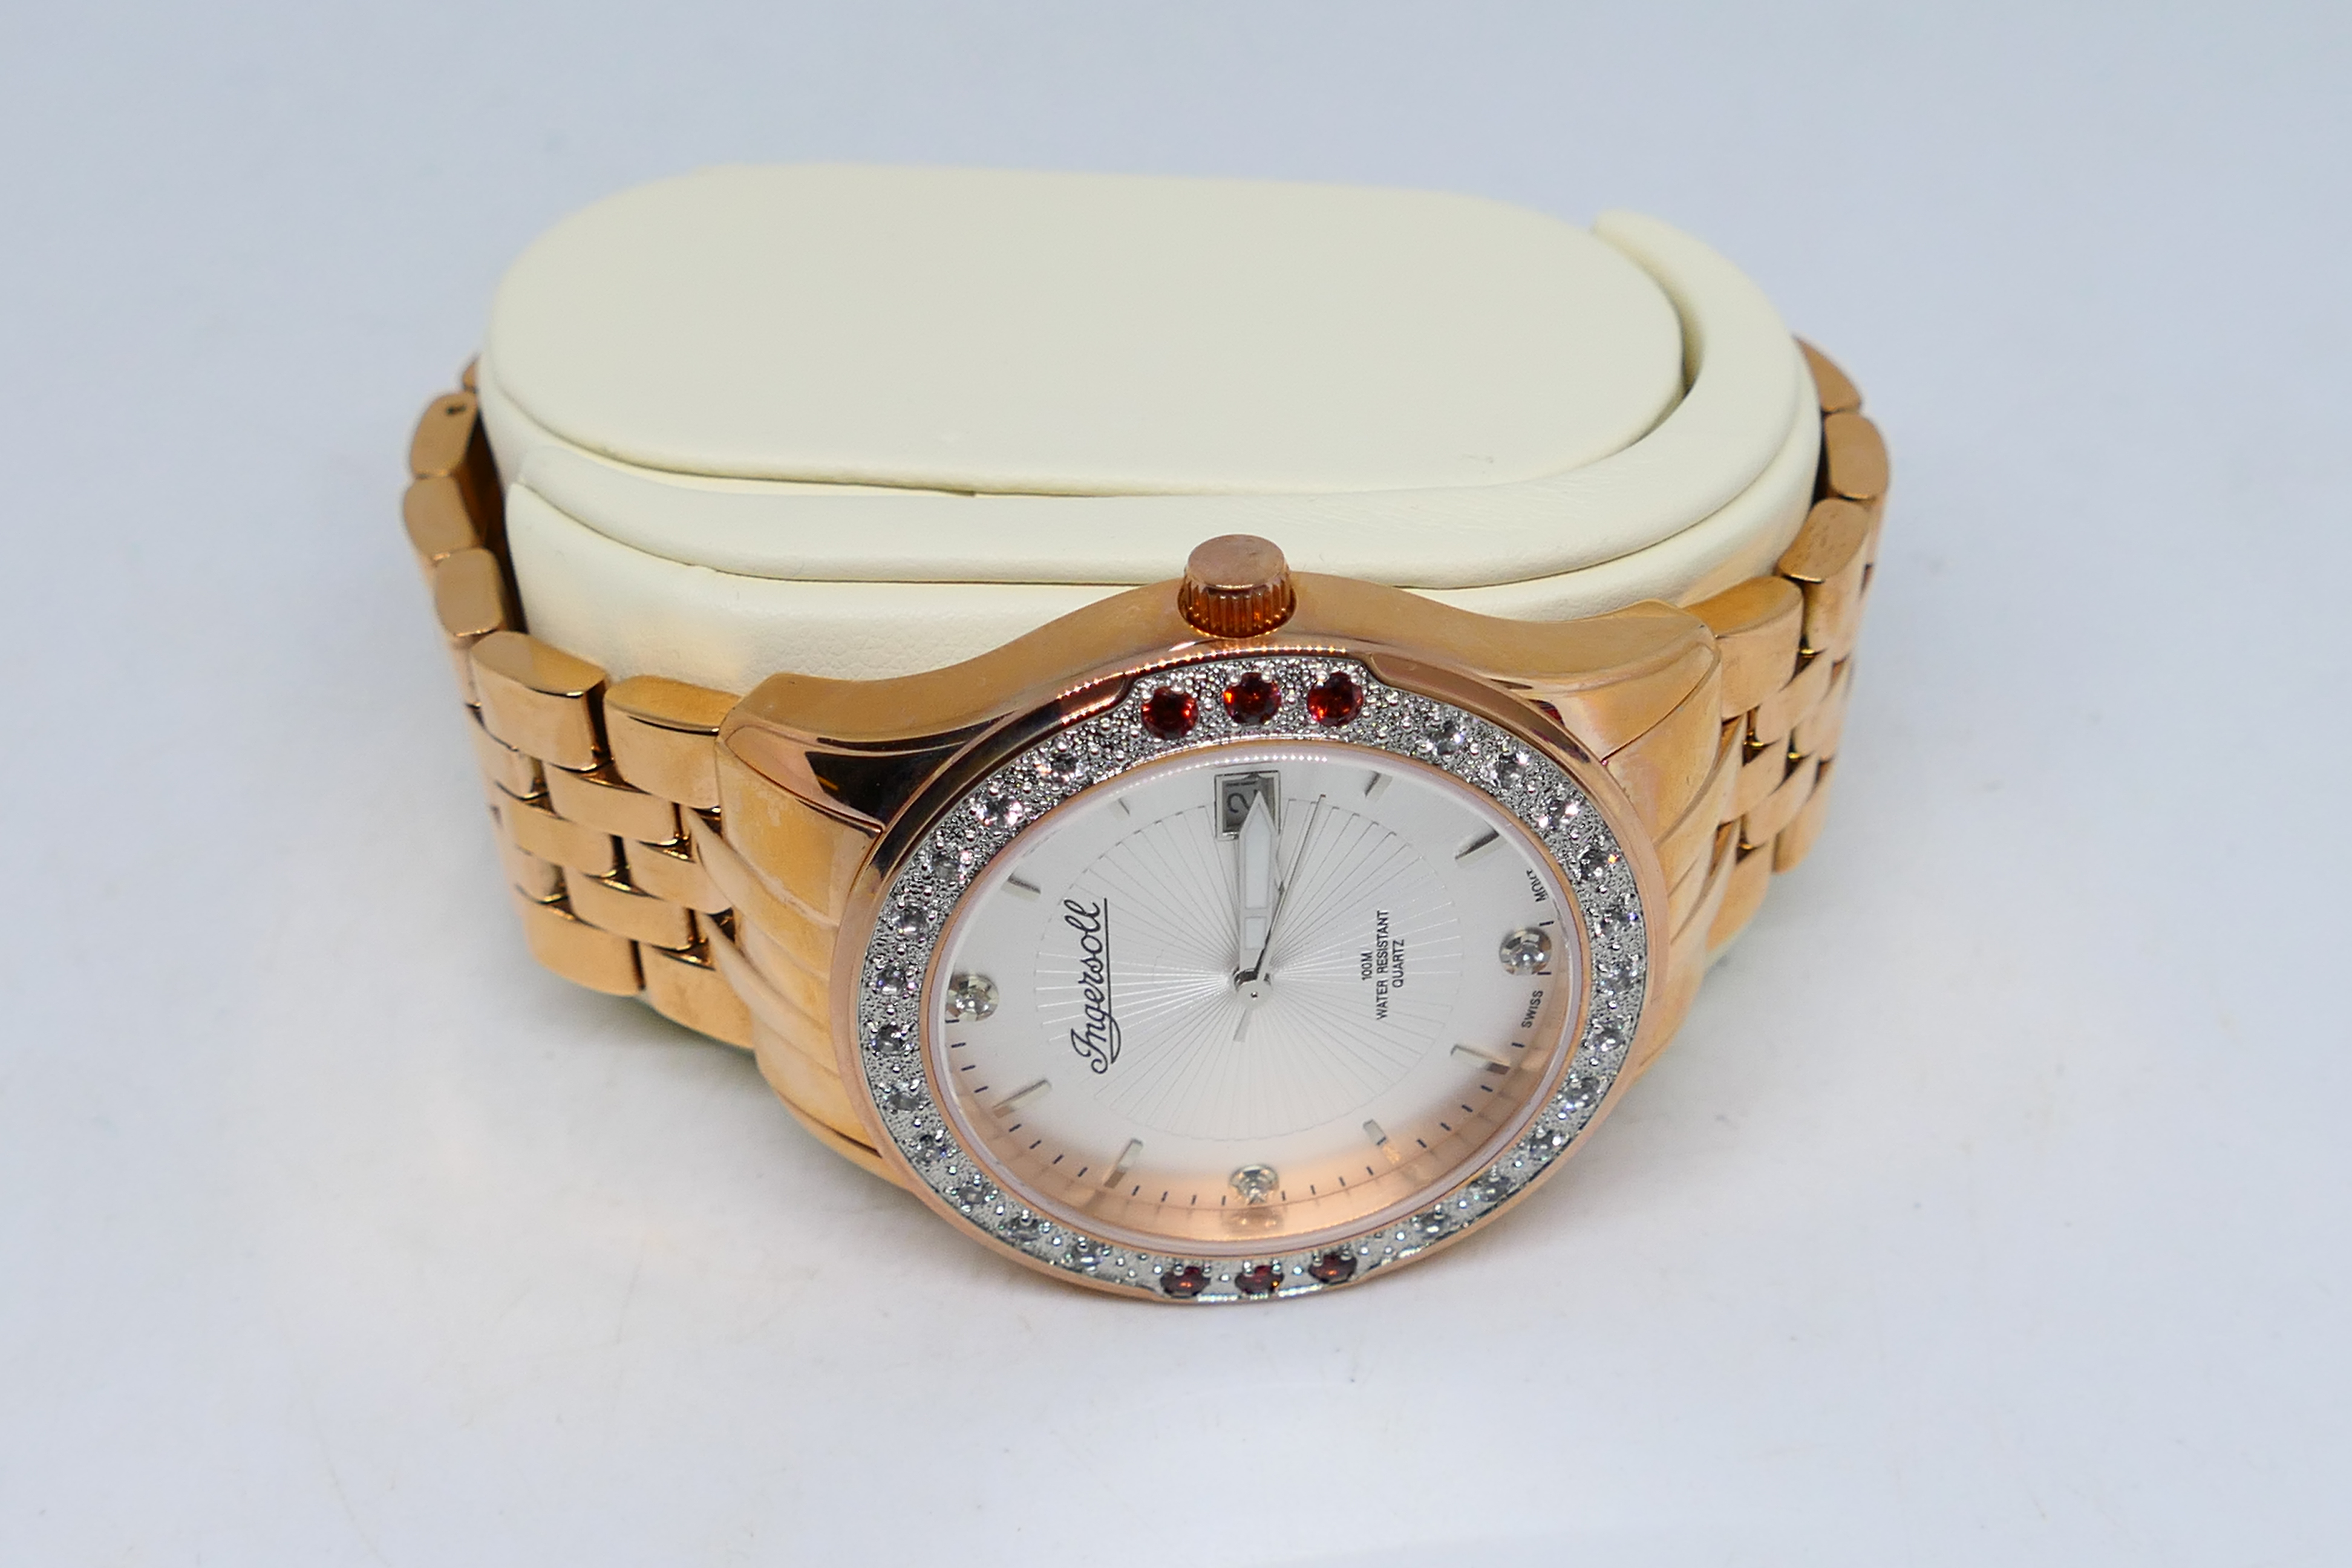 Two Ingersoll Gems stone set wrist watches housed in original boxes with paperwork and outer card - Image 6 of 11